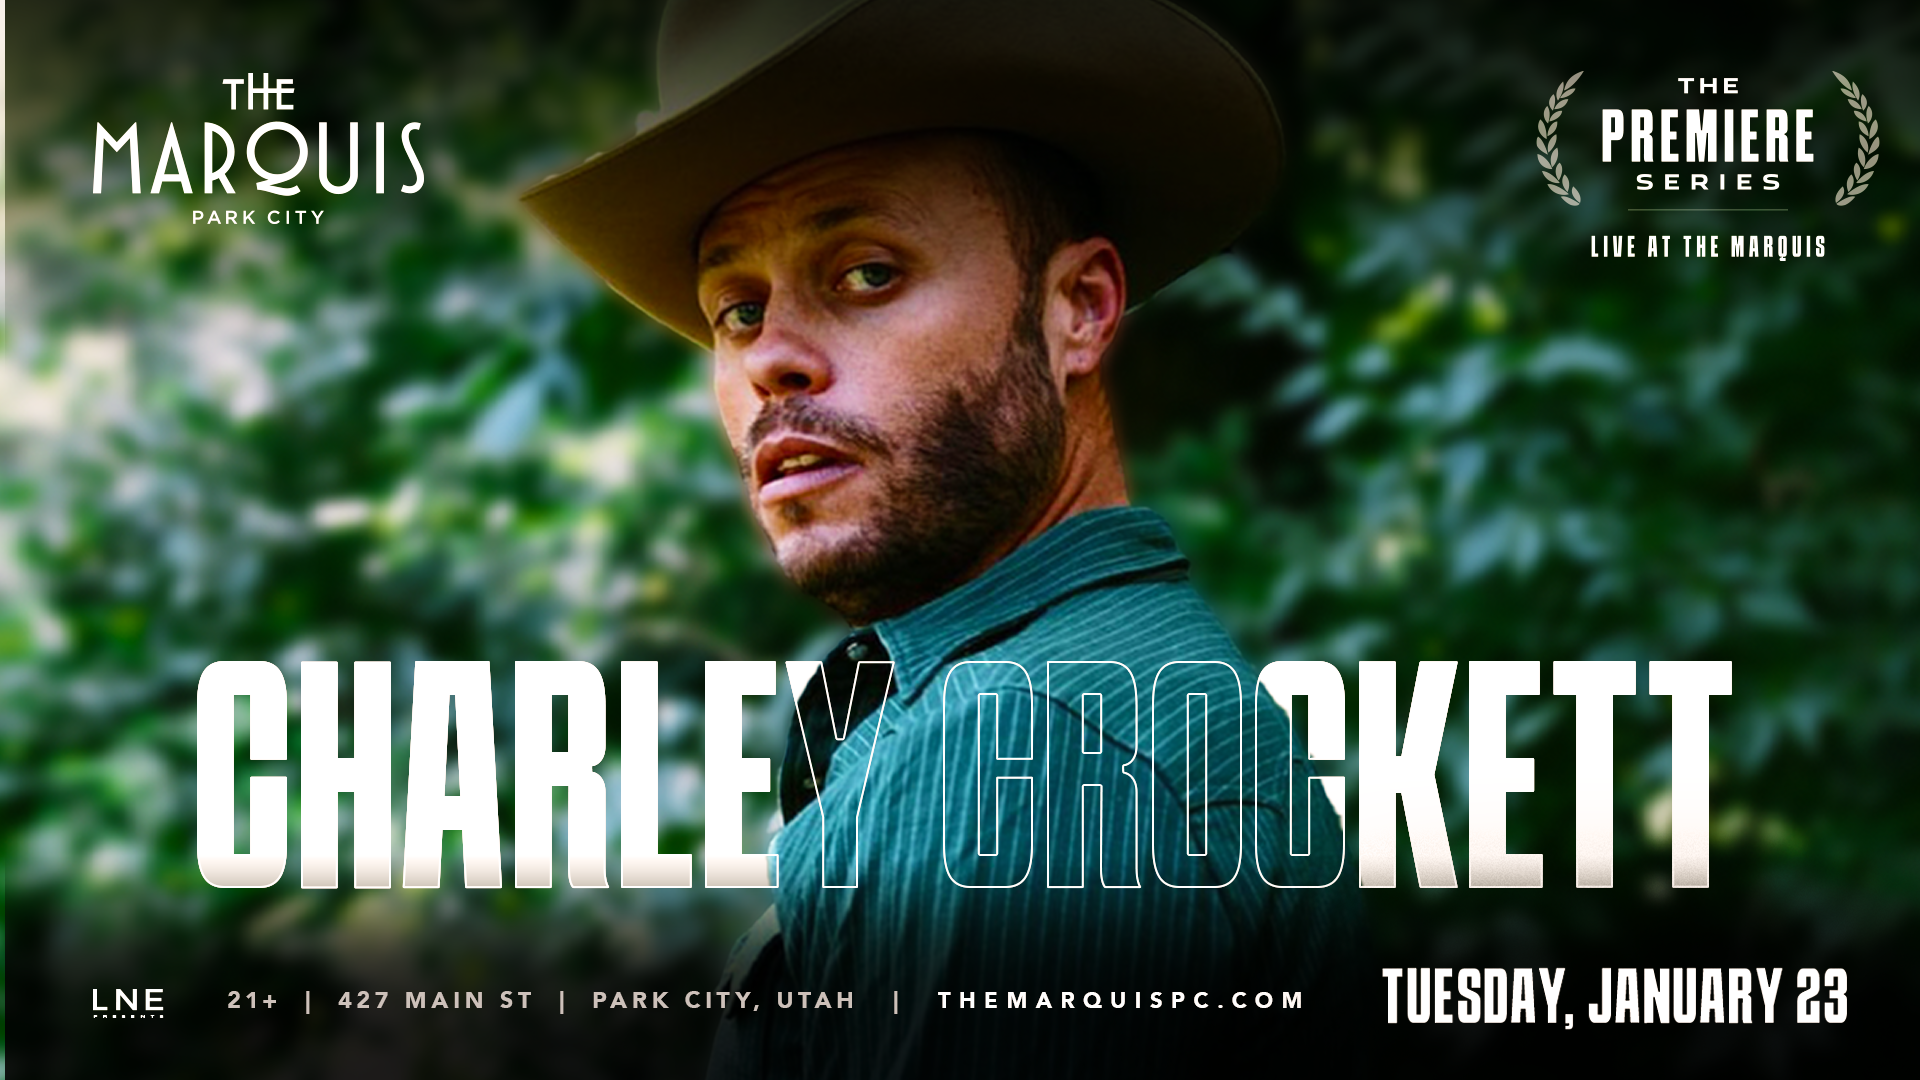 01.23_The Premiere Series_CHARLEY CROCKETT_1920x1080.png